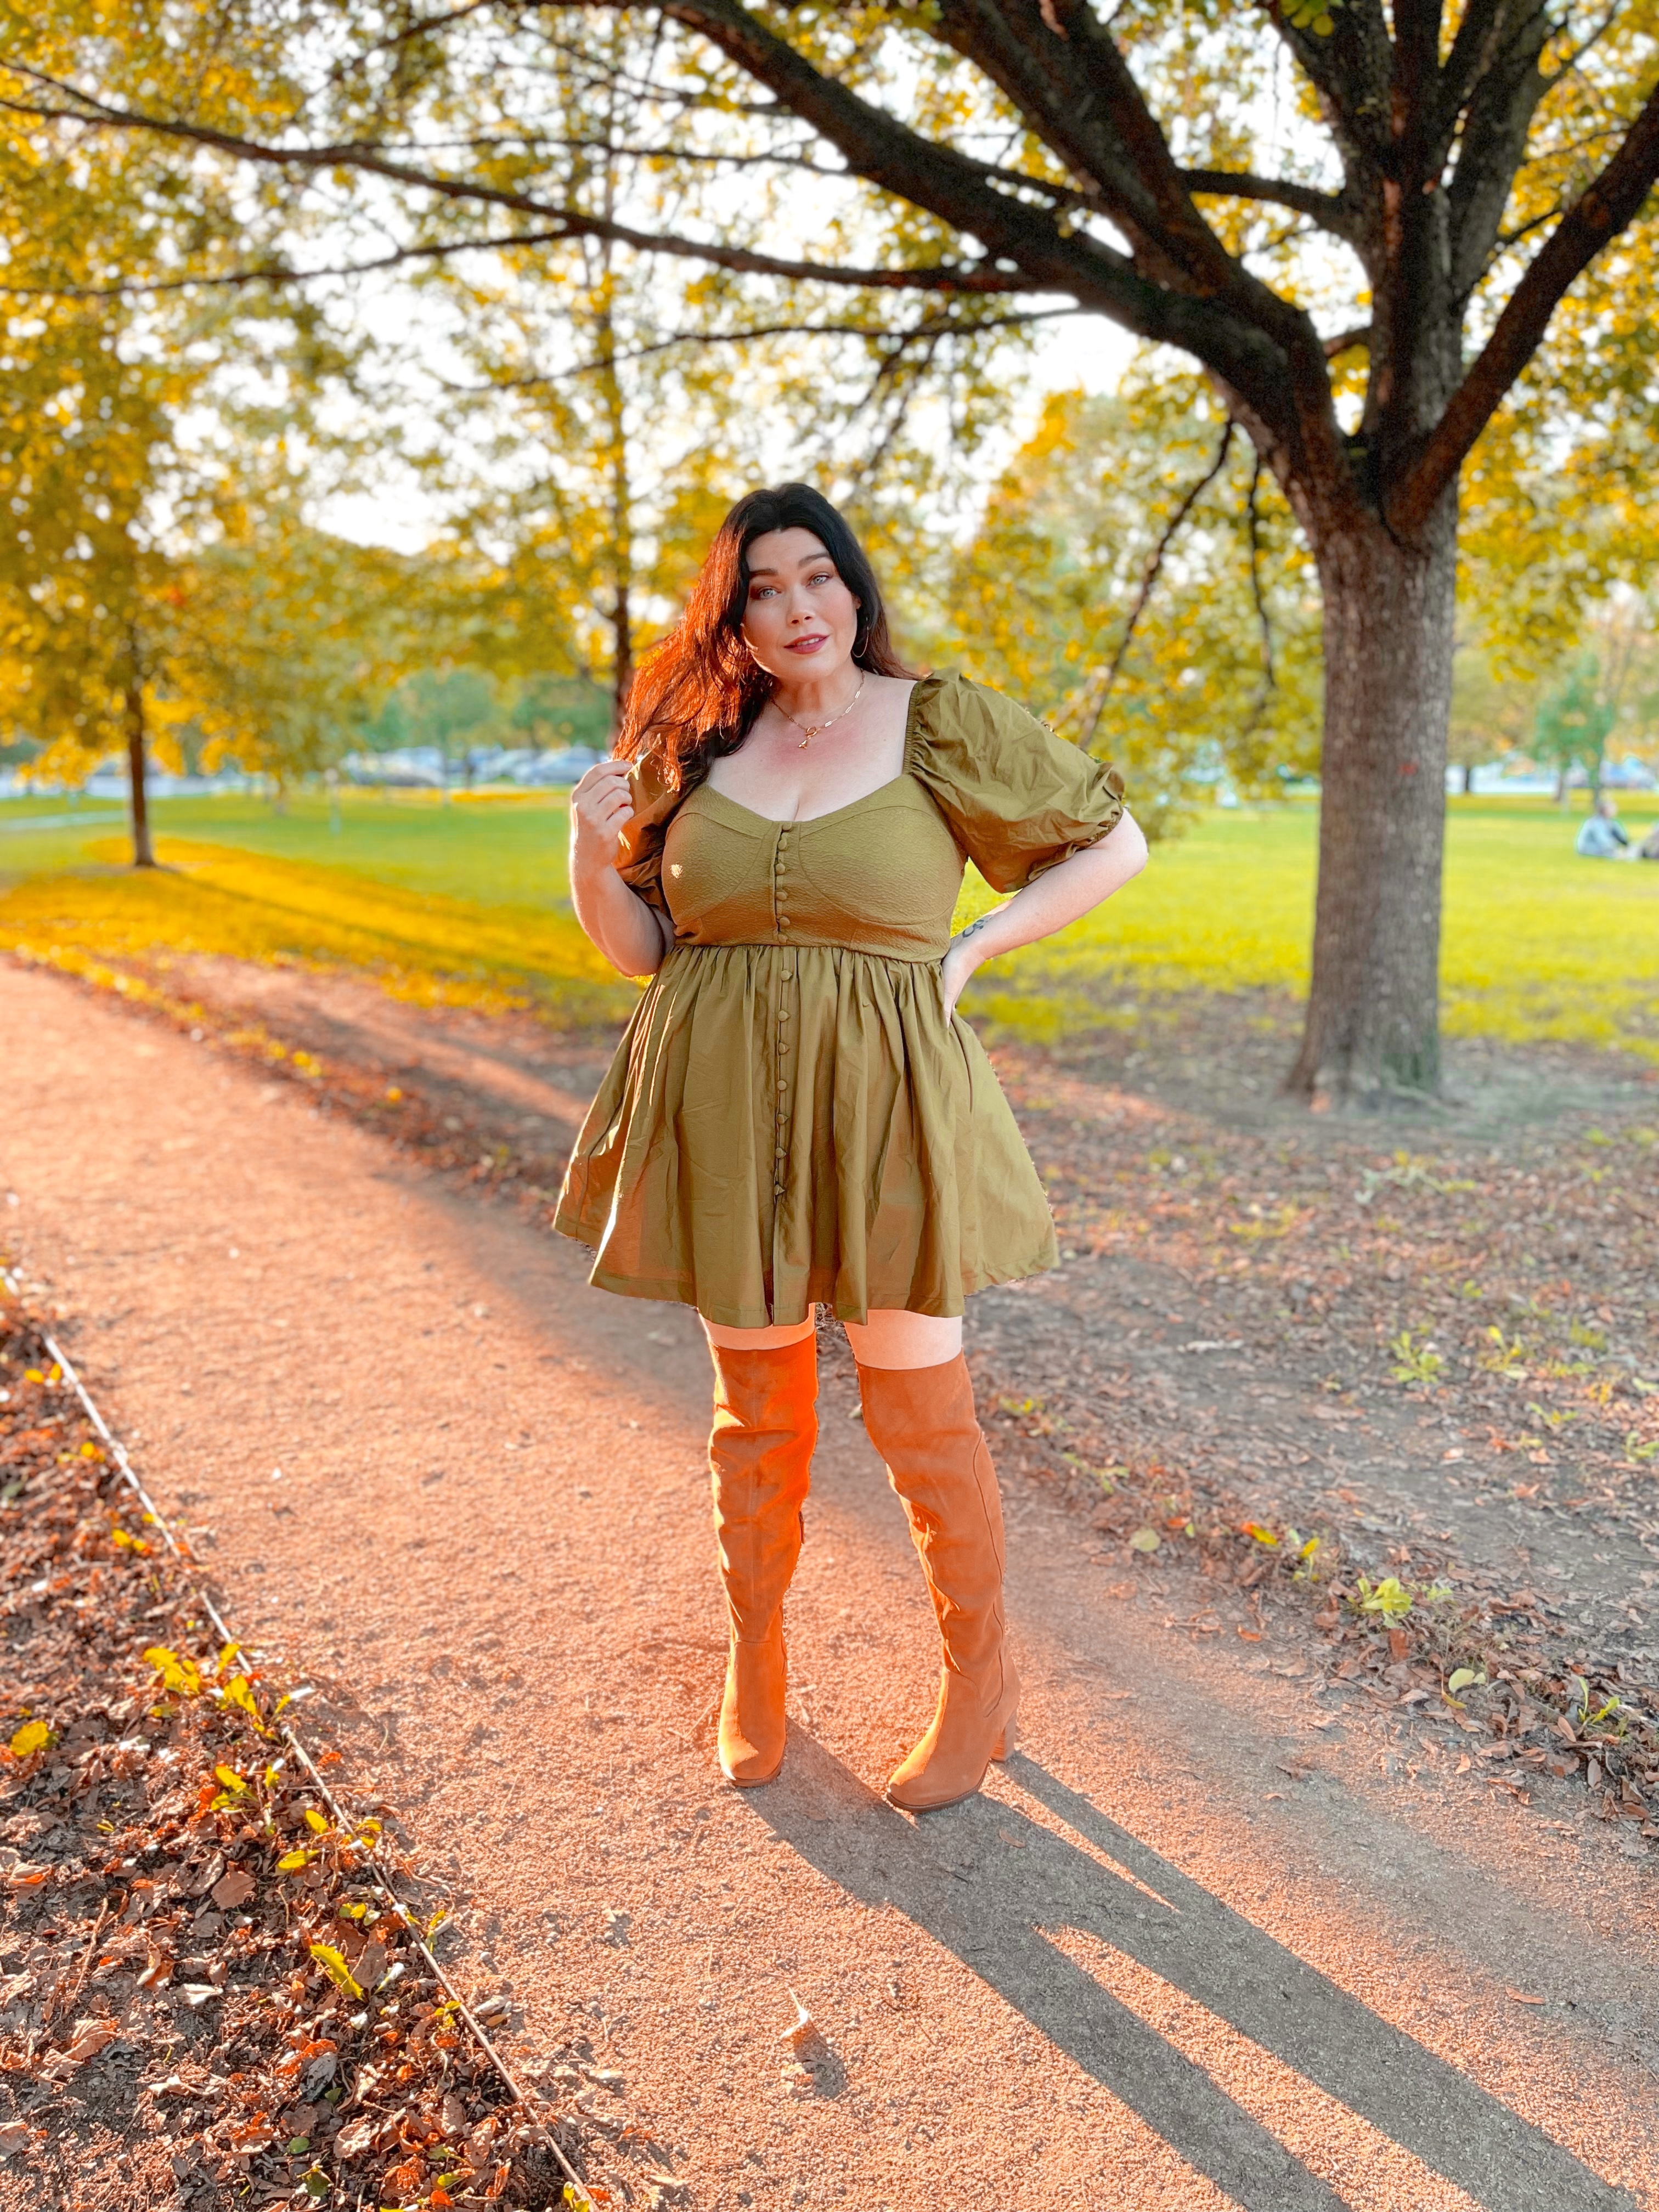 Green Plus Size Dress with OTK Boots